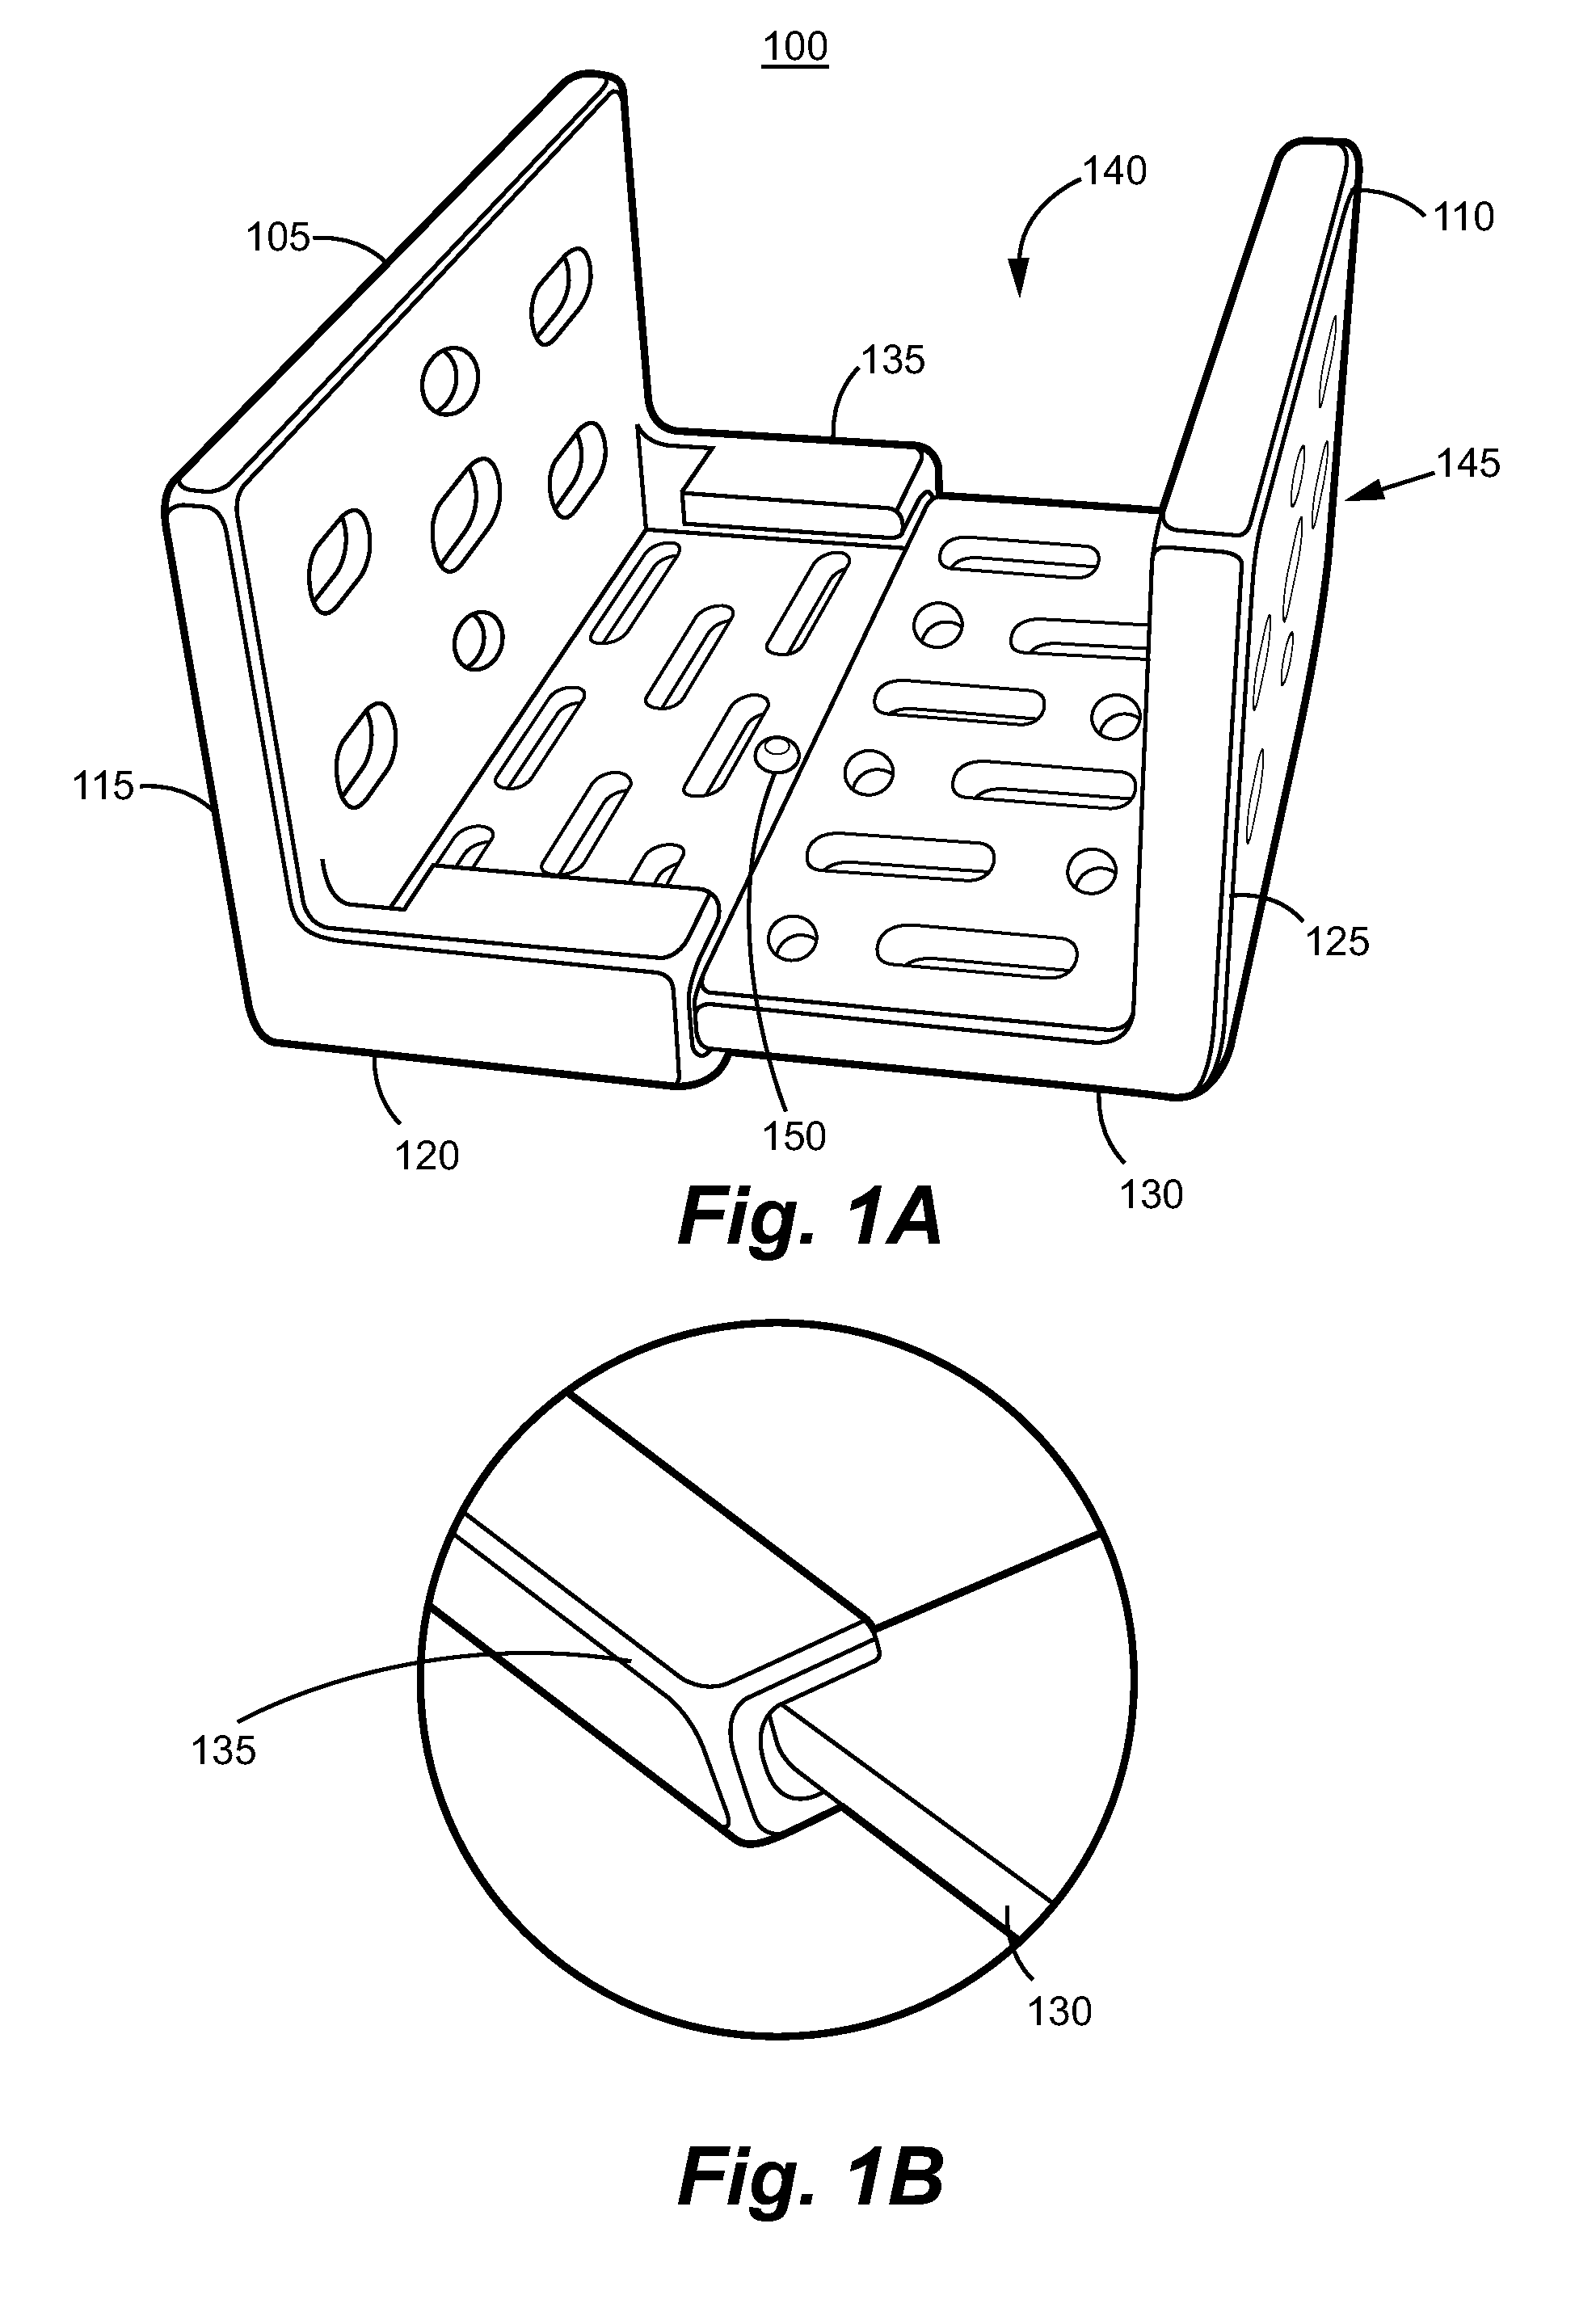 Dynamically adjustable dental impression devices and methods for using the same